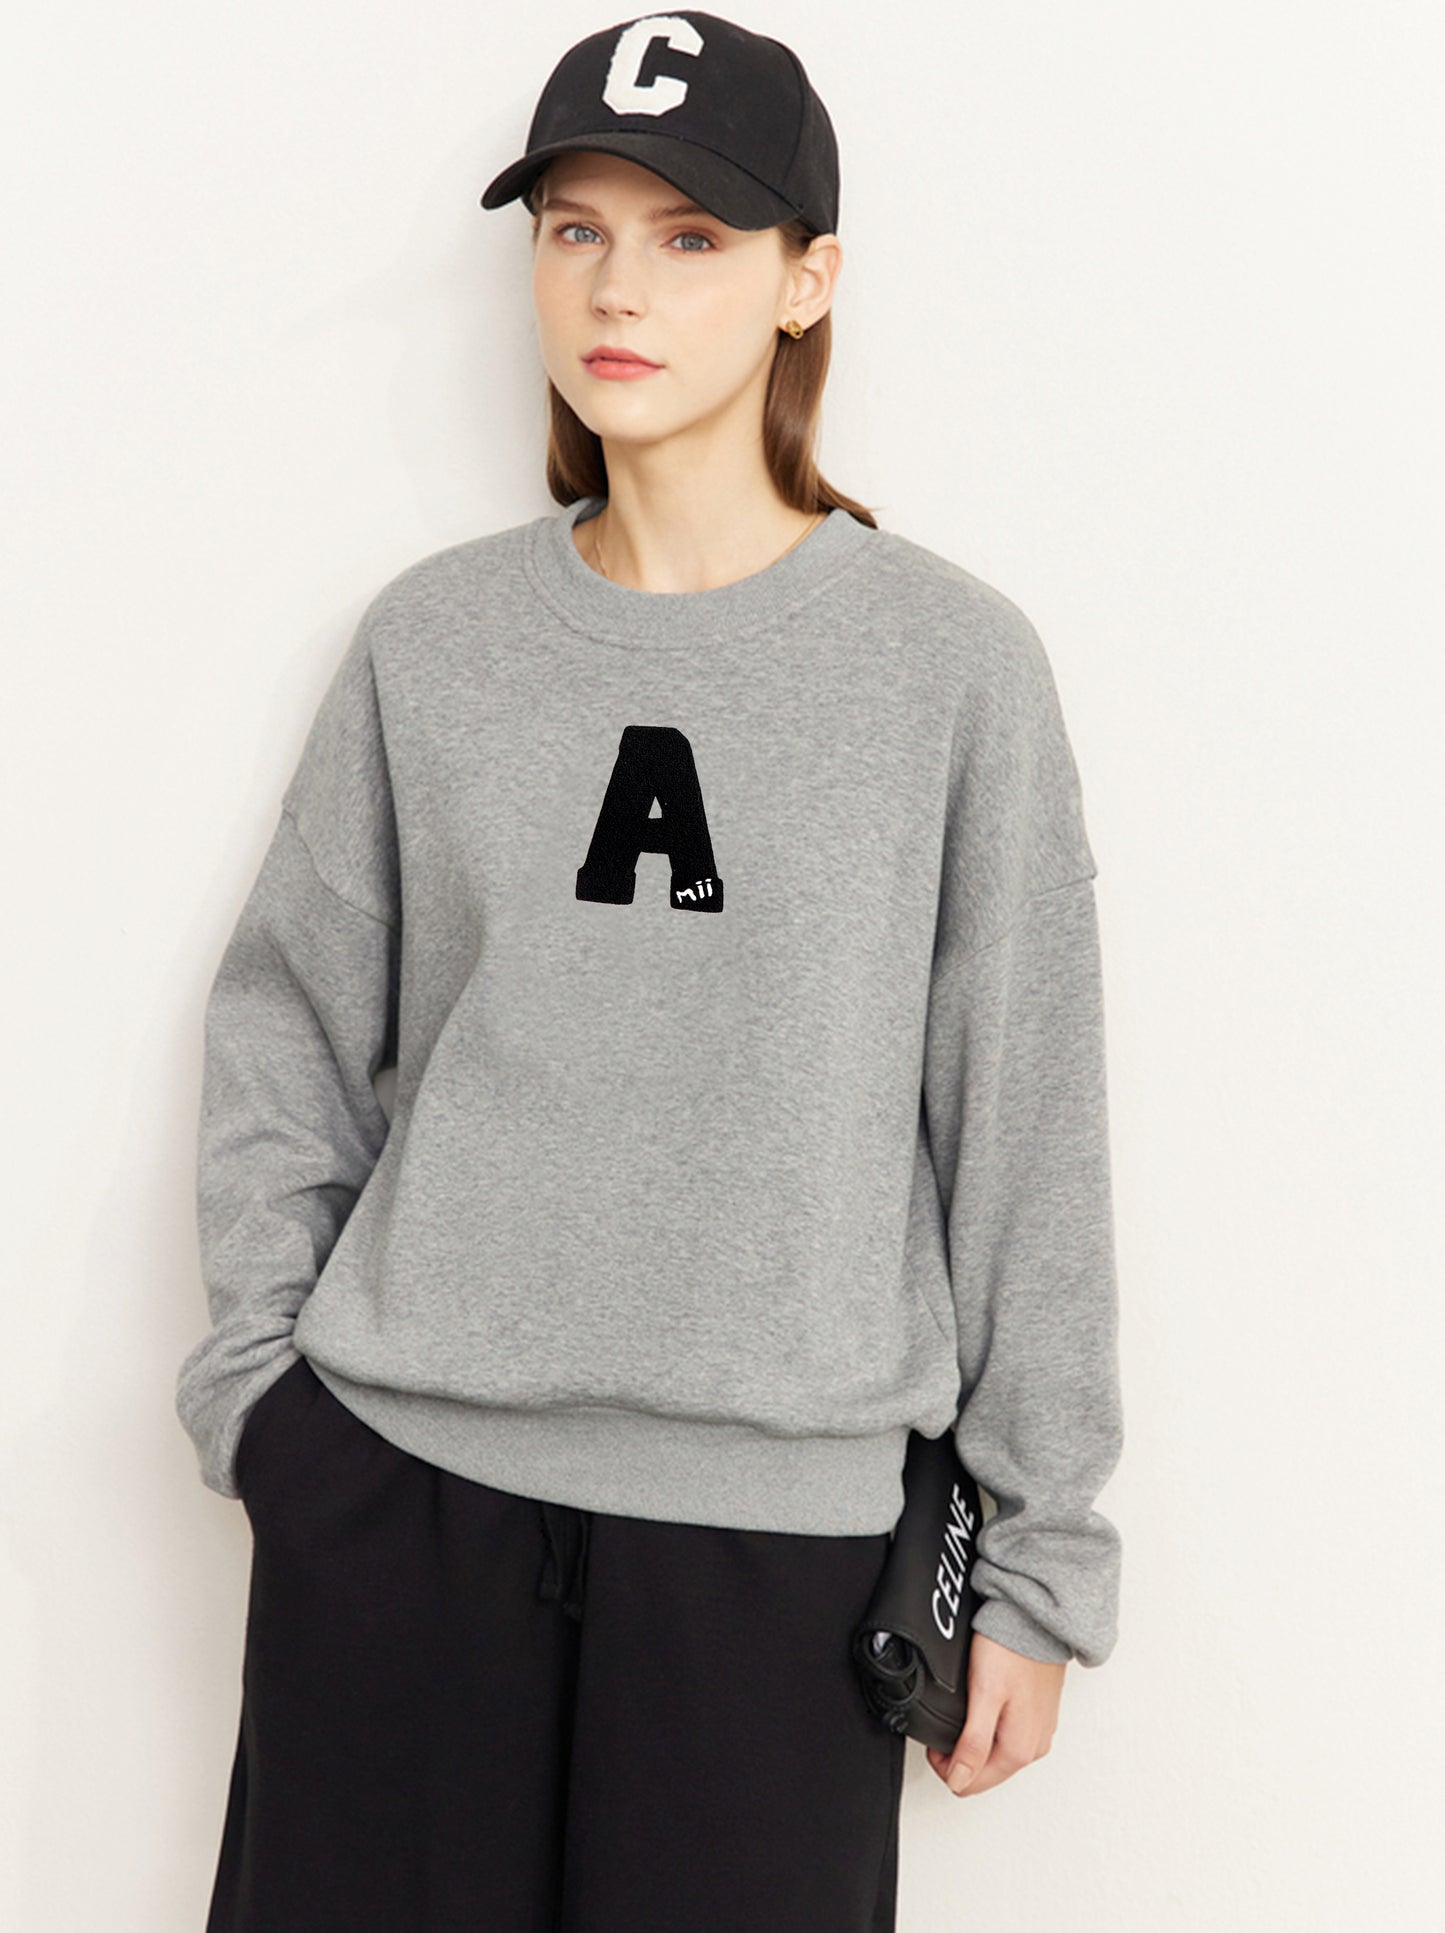 Amii Angel Classic Collection : Amii Sweater Hight Quality Embroidered Logo (Organic Cotton)